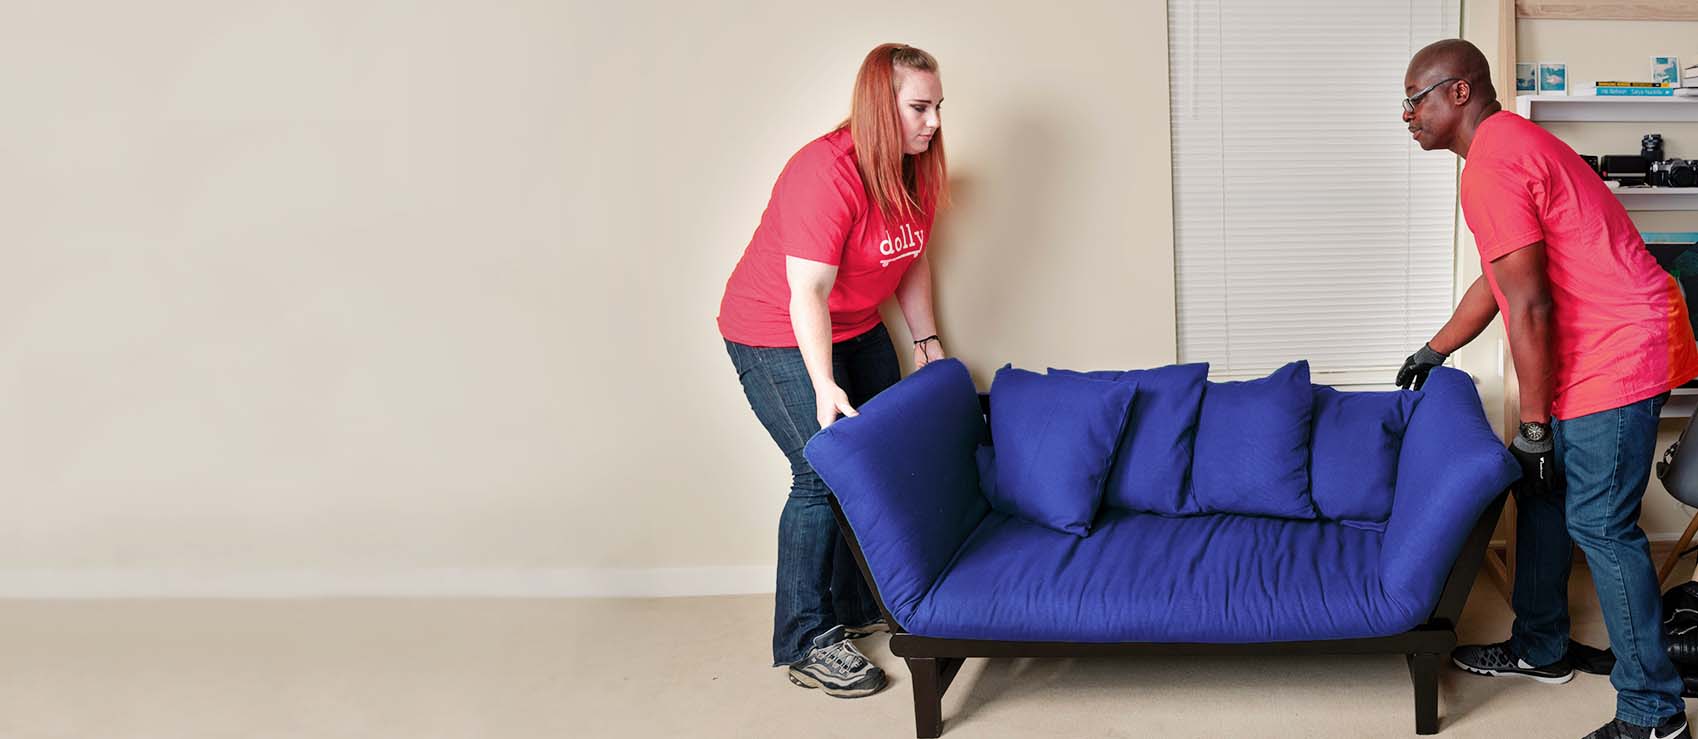 Furniture Movers in Denver Can Help Your Next Move Amazing